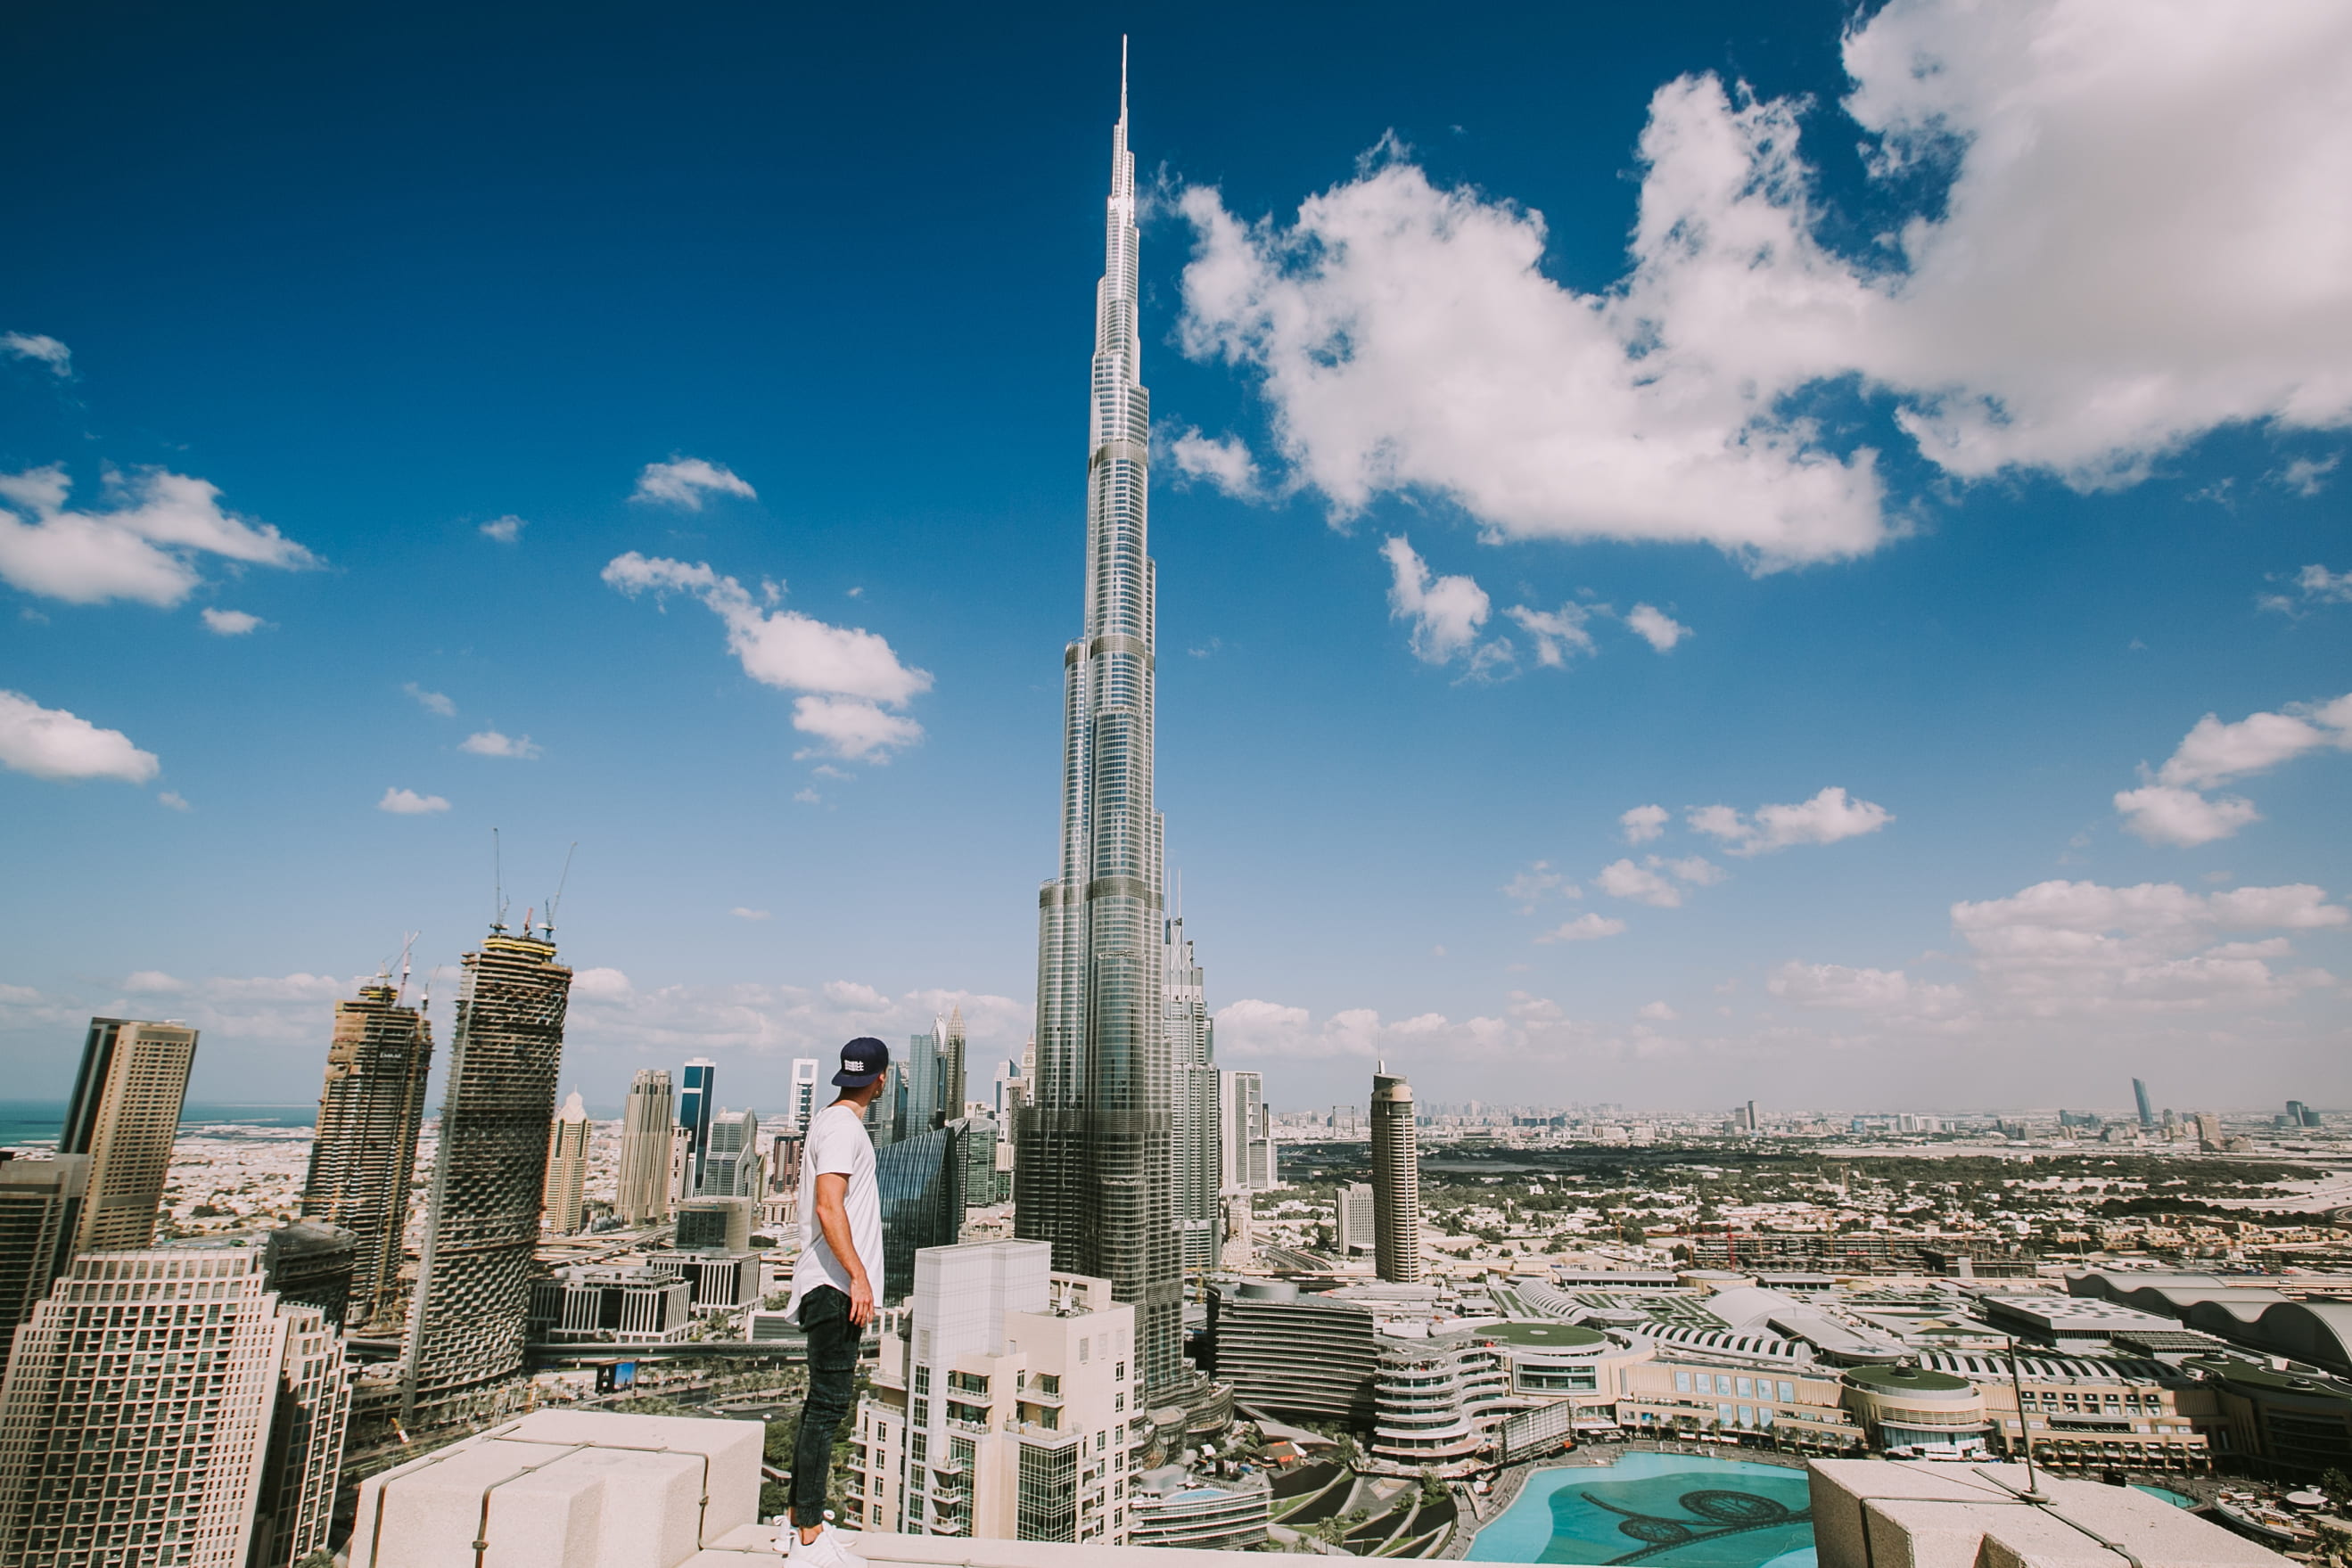 Burj Khalifa, Dubai during daytime, man standing alone on top of building looking at the city's tallest building during daytime